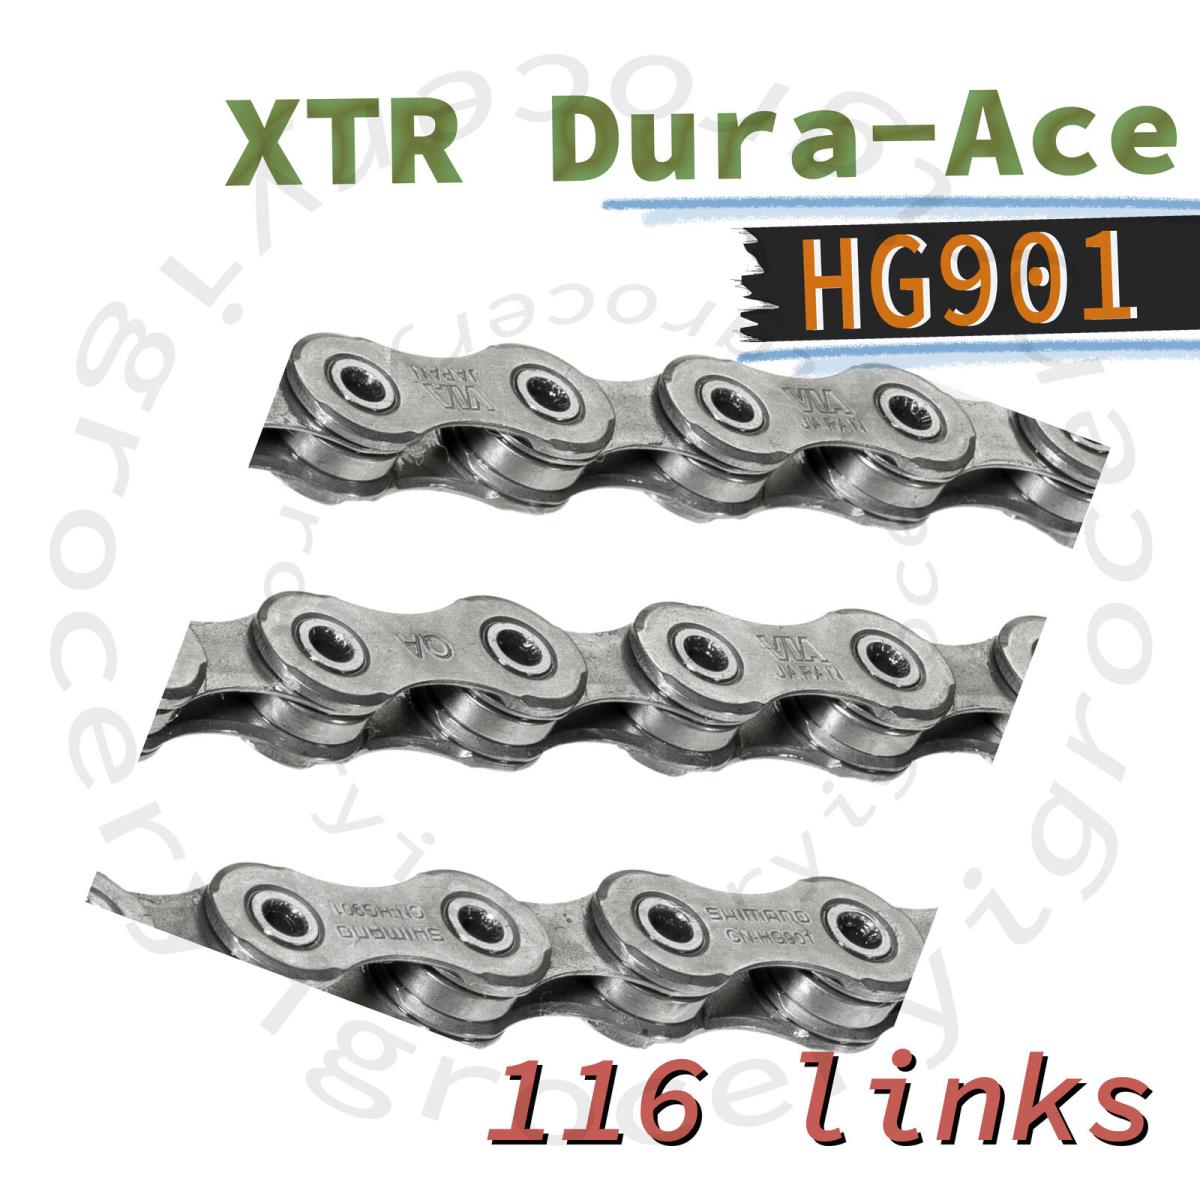 Oem Shimano Xtr Dura Ace CN-HG901-11 Chain 11-speed 116 Links Wo/quick Link